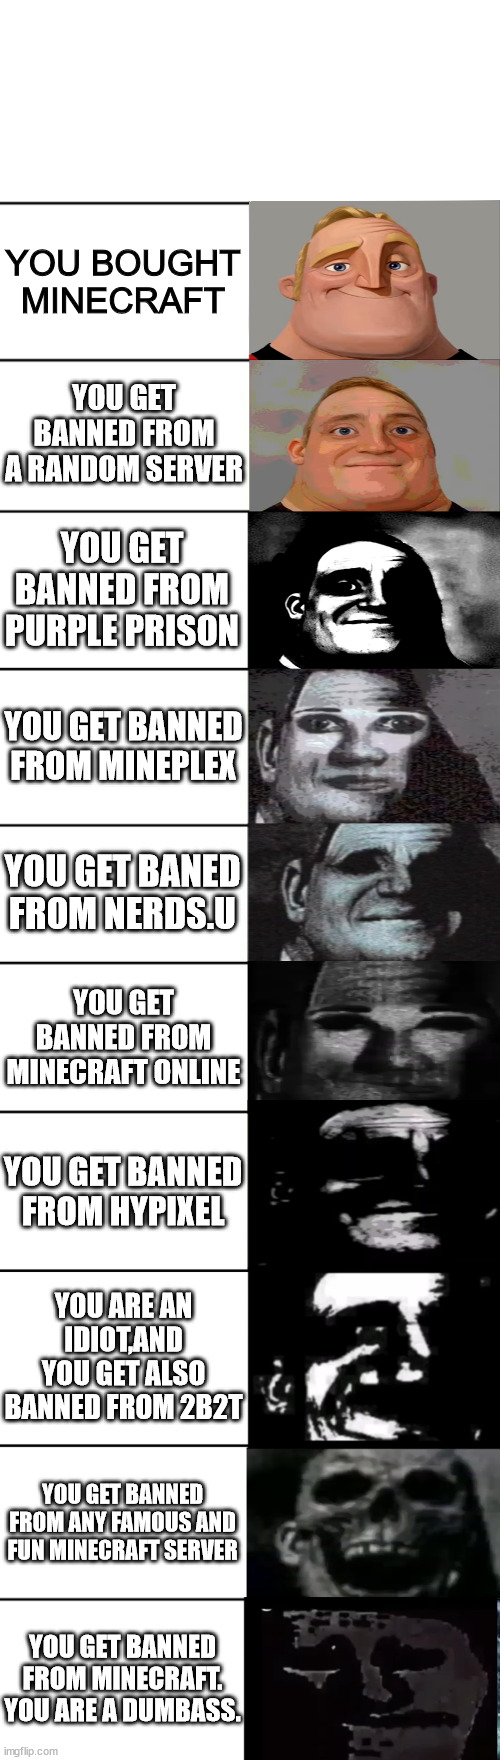 You get banned from... | YOU BOUGHT MINECRAFT; YOU GET BANNED FROM A RANDOM SERVER; YOU GET BANNED FROM PURPLE PRISON; YOU GET BANNED FROM MINEPLEX; YOU GET BANED FROM NERDS.U; YOU GET BANNED FROM MINECRAFT ONLINE; YOU GET BANNED FROM HYPIXEL; YOU ARE AN IDIOT,AND YOU GET ALSO BANNED FROM 2B2T; YOU GET BANNED FROM ANY FAMOUS AND FUN MINECRAFT SERVER; YOU GET BANNED FROM MINECRAFT. YOU ARE A DUMBASS. | image tagged in mr incredible becoming uncanny,minecraft,banned | made w/ Imgflip meme maker